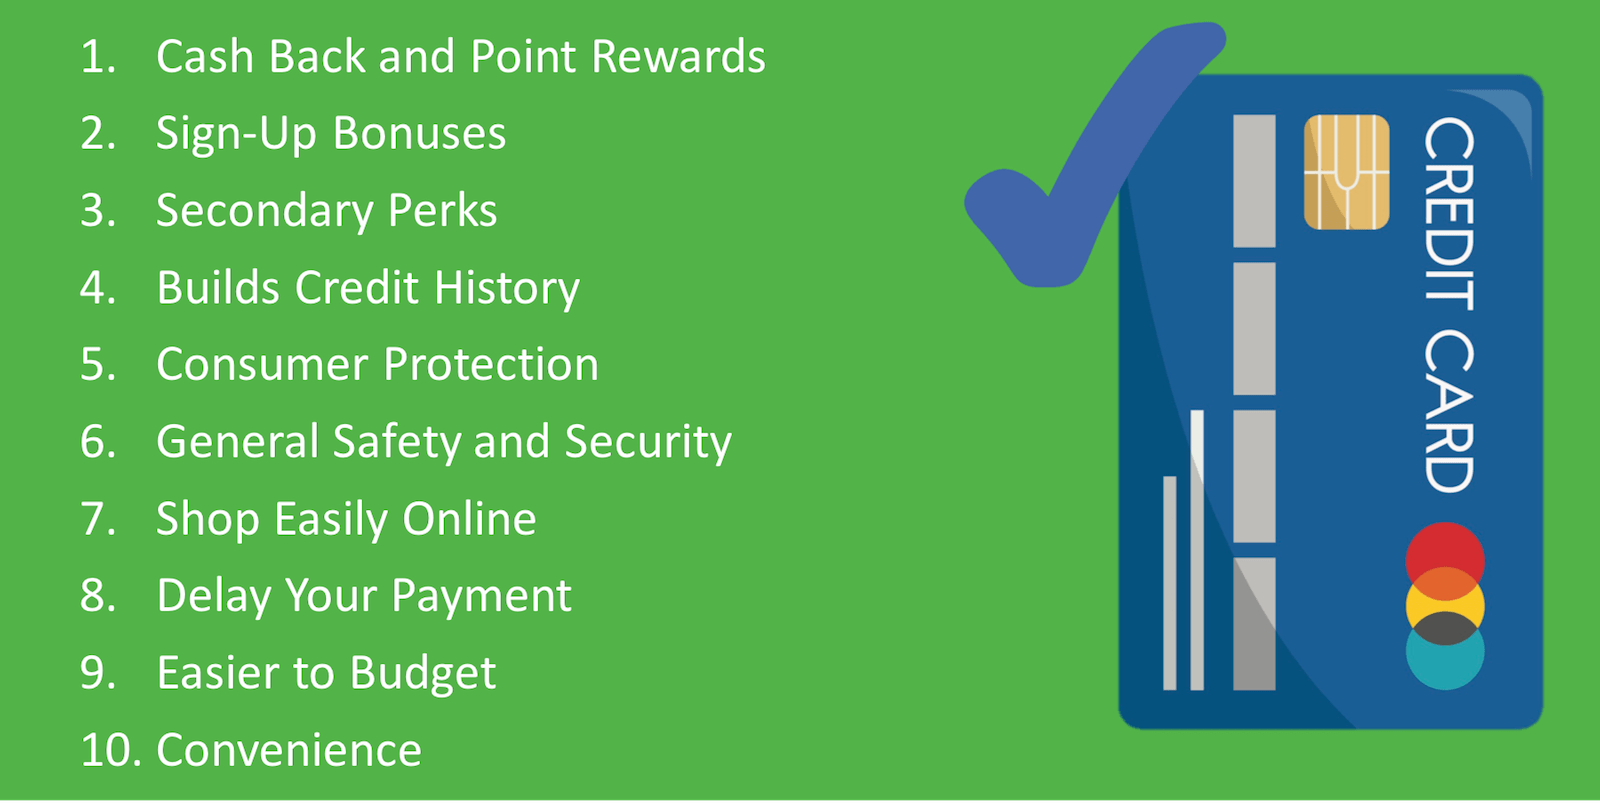  A blue credit card with a green background lists the benefits of using easy-to-get credit cards: cash back and point rewards, sign-up bonuses, secondary perks, builds credit history, consumer protection, general safety and security, shop easily online, delay your payment, easier to budget, and convenience.